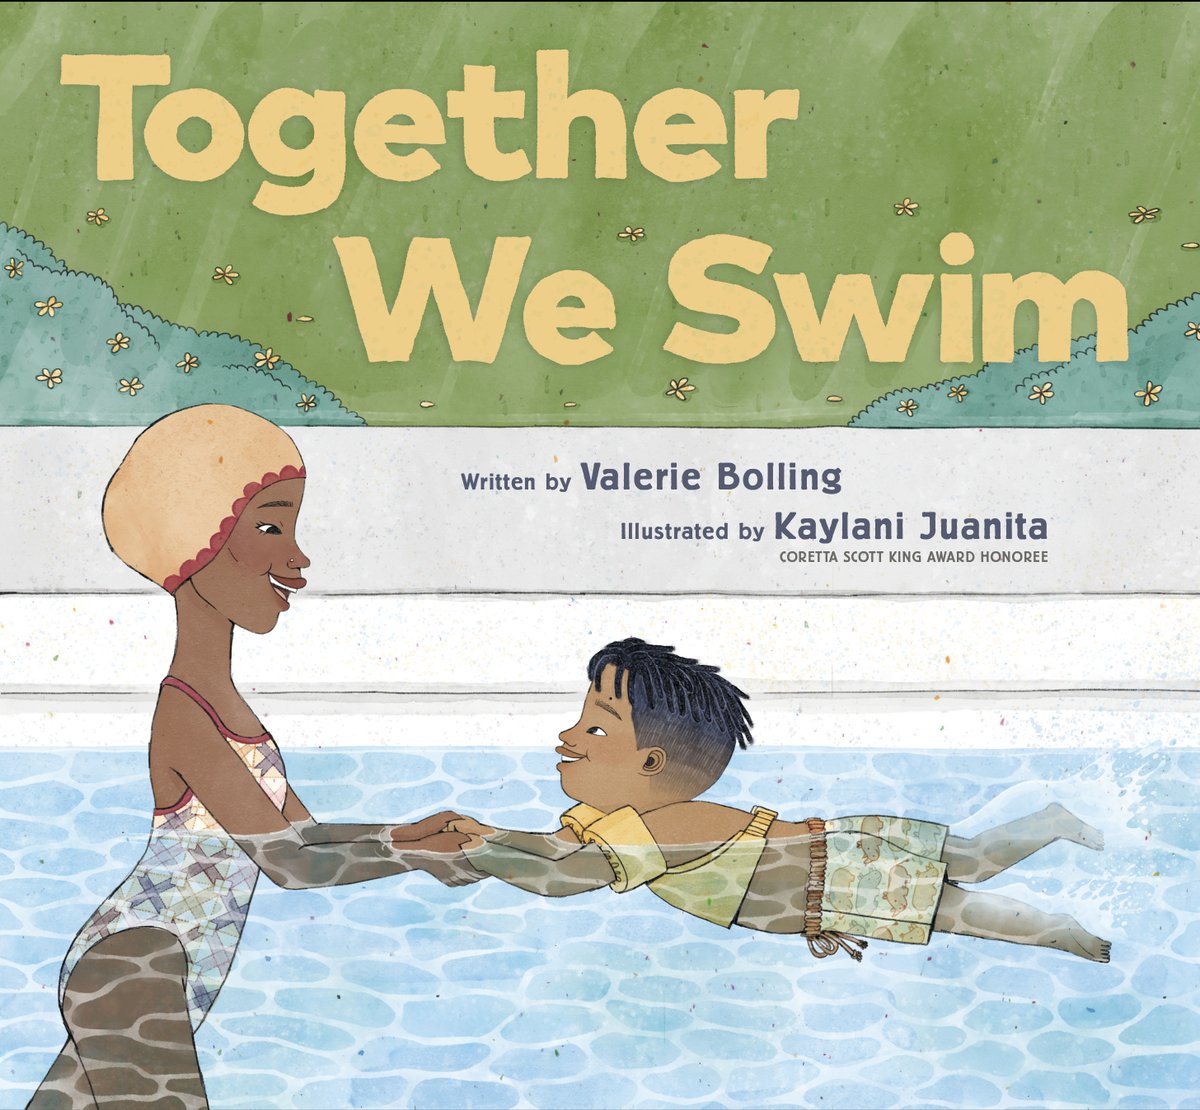 #HappyNationalLearntoSwimDay! Honor the day by checking out #TogetherWeSwim from your library and writing a review. Make a splash! @kaylanijuanita @BookishAriel @ChronicleKids @jmcgowanbks @KidlitInColor @Soaring20sPB @HighlightsFound